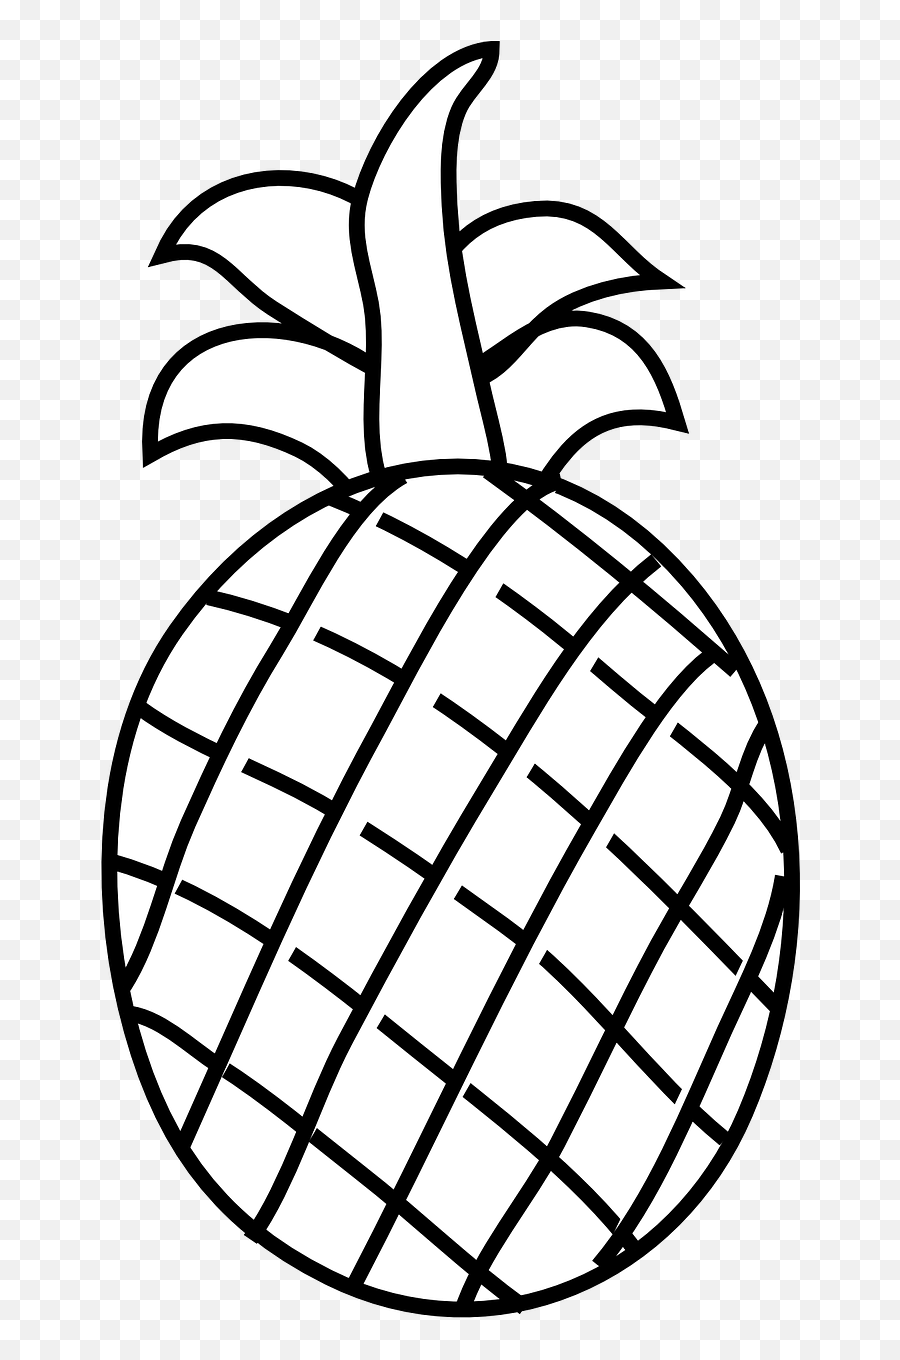 Pineapple Drawing Png - Pineapple Fruit Food Plant Png Image Pineapple Clip Art,Pineapple Clipart Transparent Background